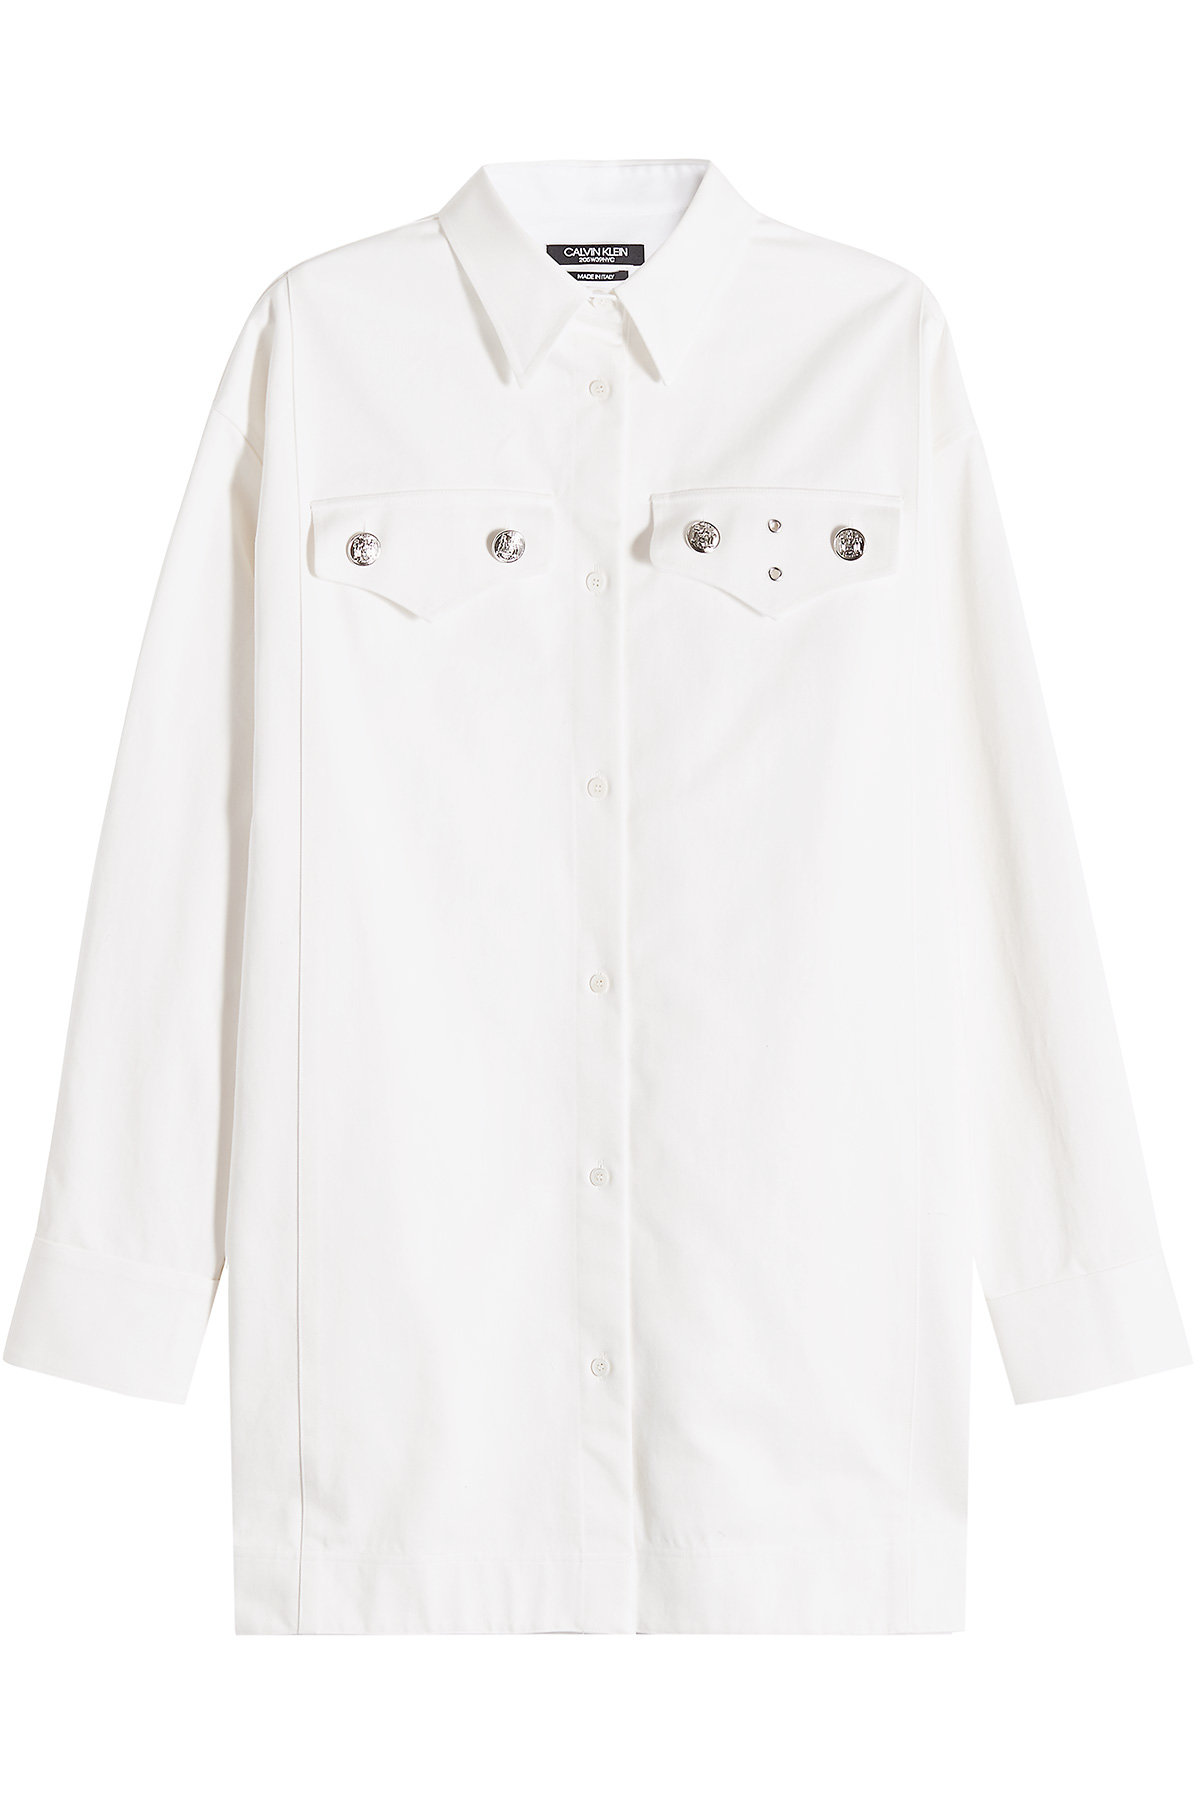 CALVIN KLEIN 205W39NYC - Oversized Cotton Shirt with Embossed Buttons